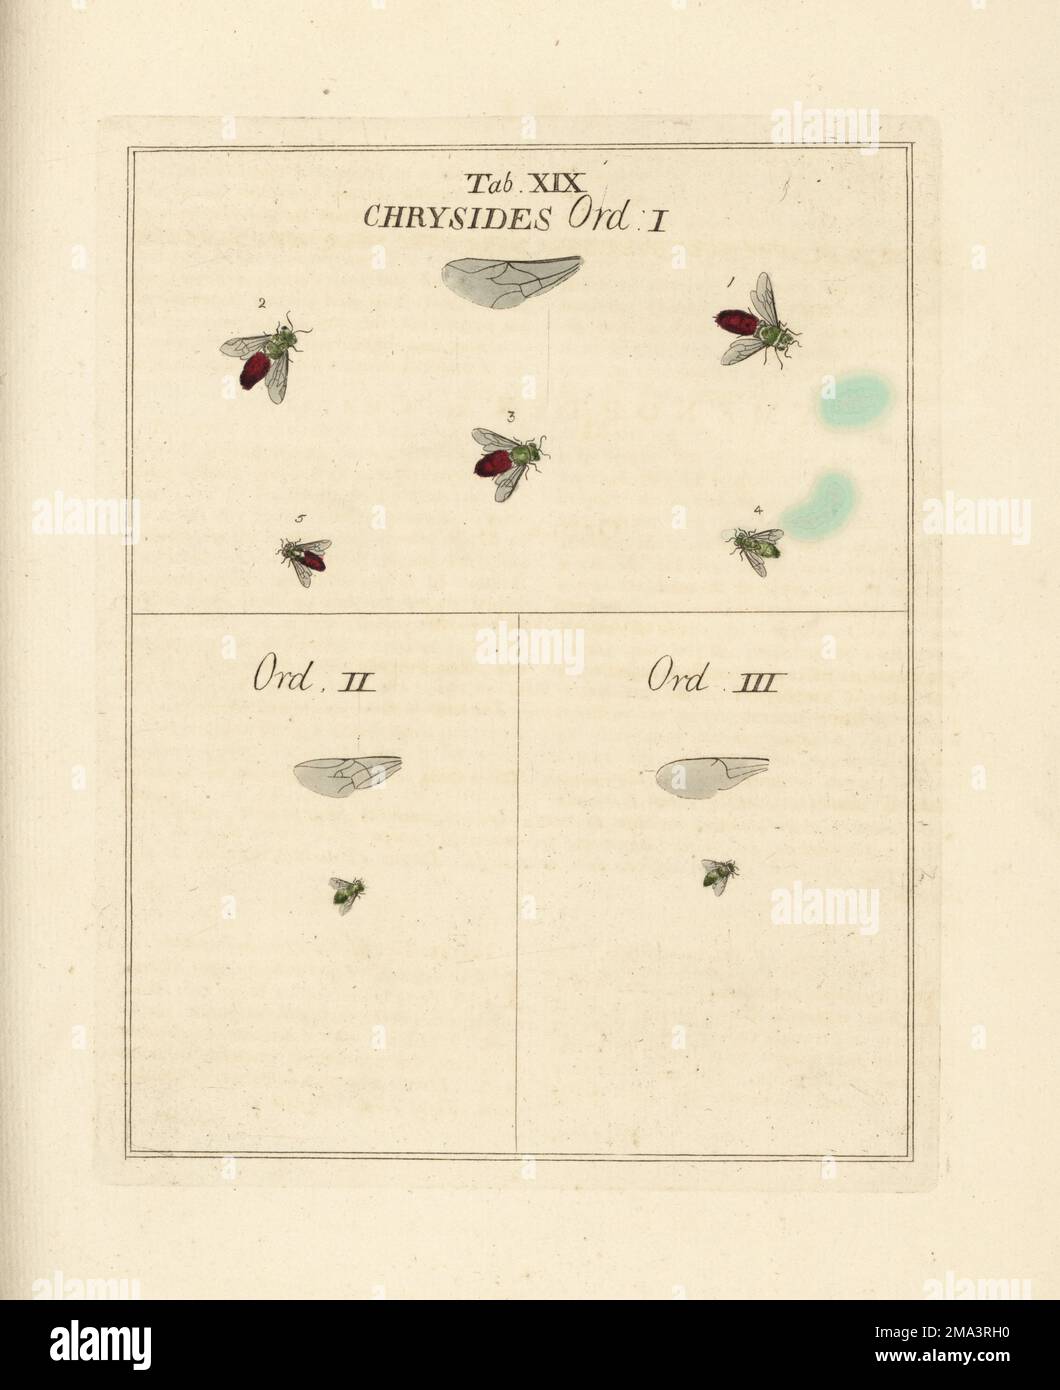 Cuckoo wasp, Sphex ignita 1, shimmering ruby tail, Chrysis fulgida 2, Chrysura radians 3, C. veridans 4, C. hephaestites 5, Order I. Chrysis curax, Order II, Chrysis politus, Order III. Hymenoptera. Chryside. Handcoloured copperplate engraving drawn and engraved by Moses Harris from his own Exposition of English Insects, Including the several Classes of Neuroptera, Hymenoptera, Diptera, or Bees, Flies and Libellulae, White and Robson, London, 1782. Stock Photo